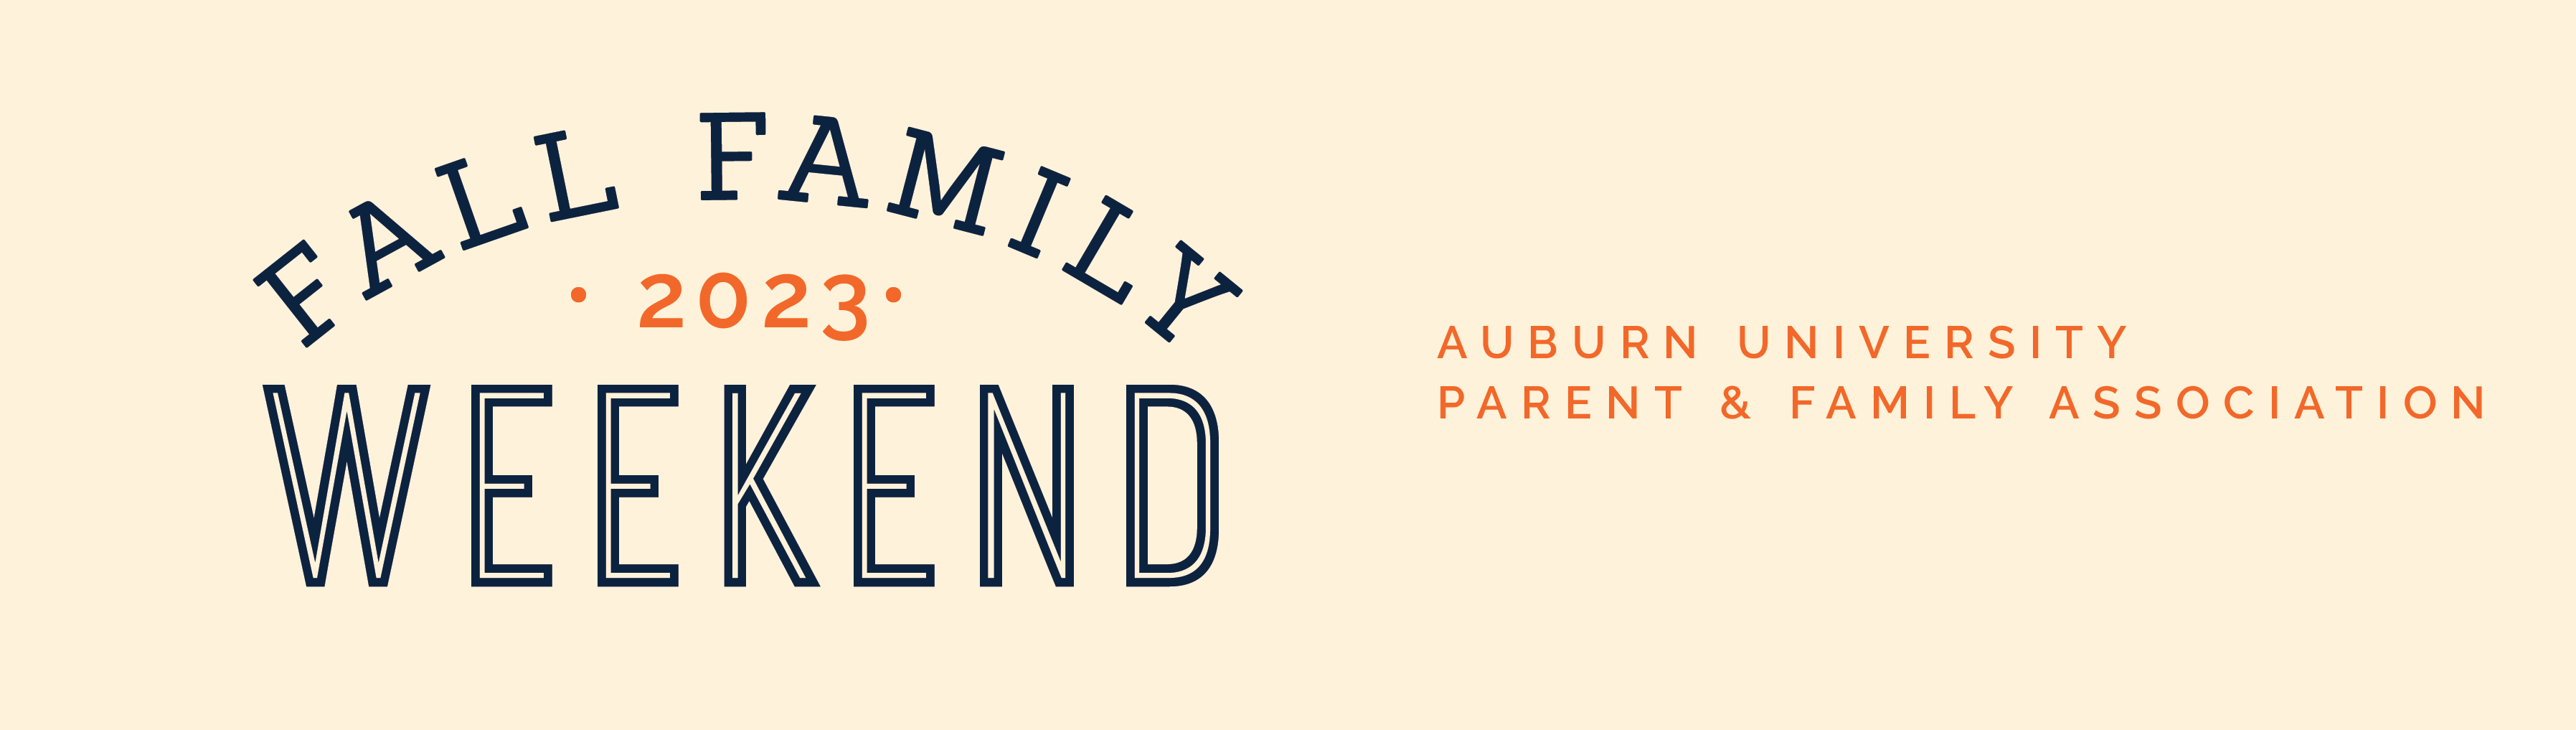 Fall Family Weekend Parent & Family Programs